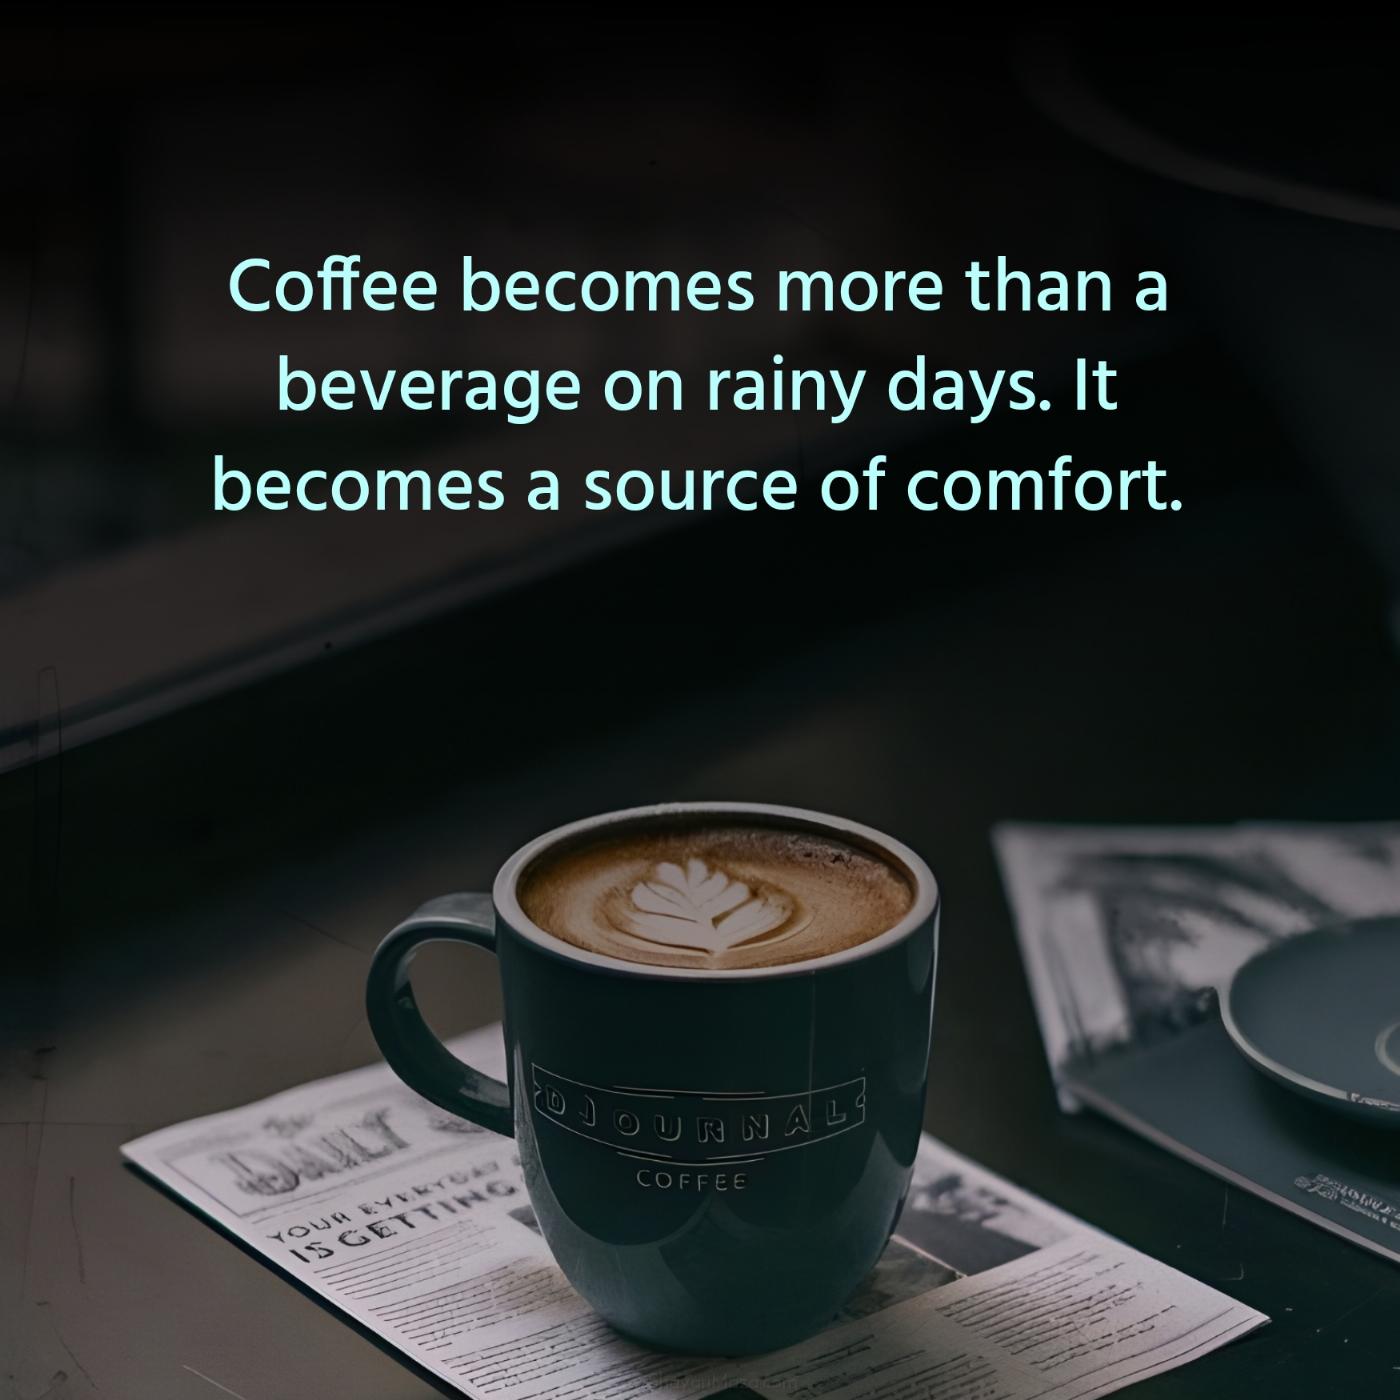 Coffee becomes more than a beverage on rainy days